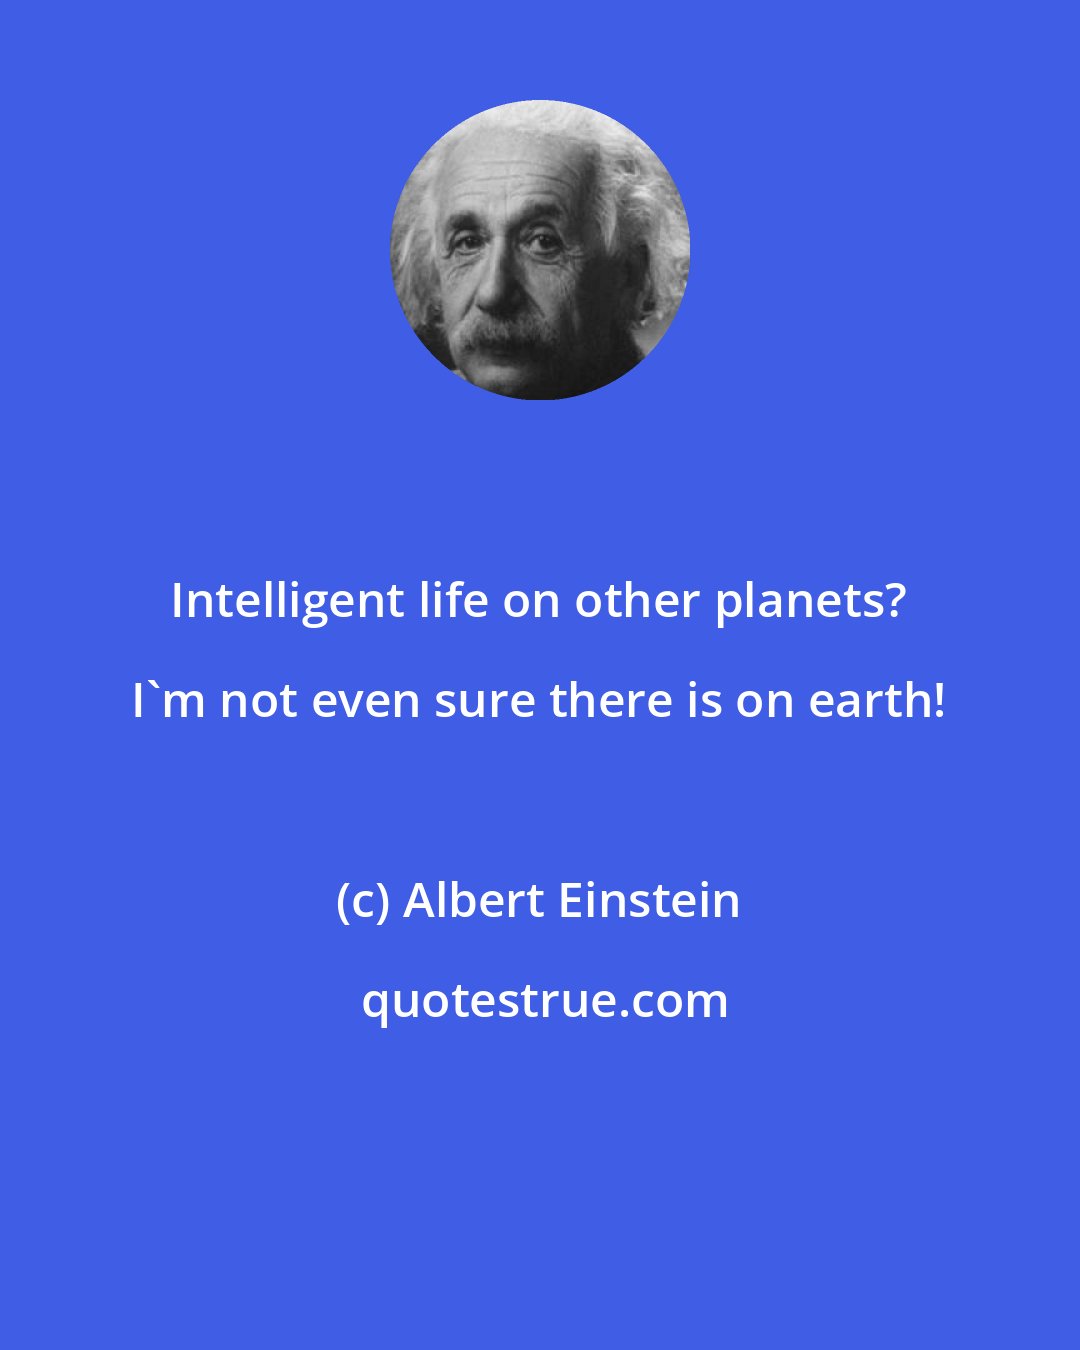 Albert Einstein: Intelligent life on other planets? I'm not even sure there is on earth!